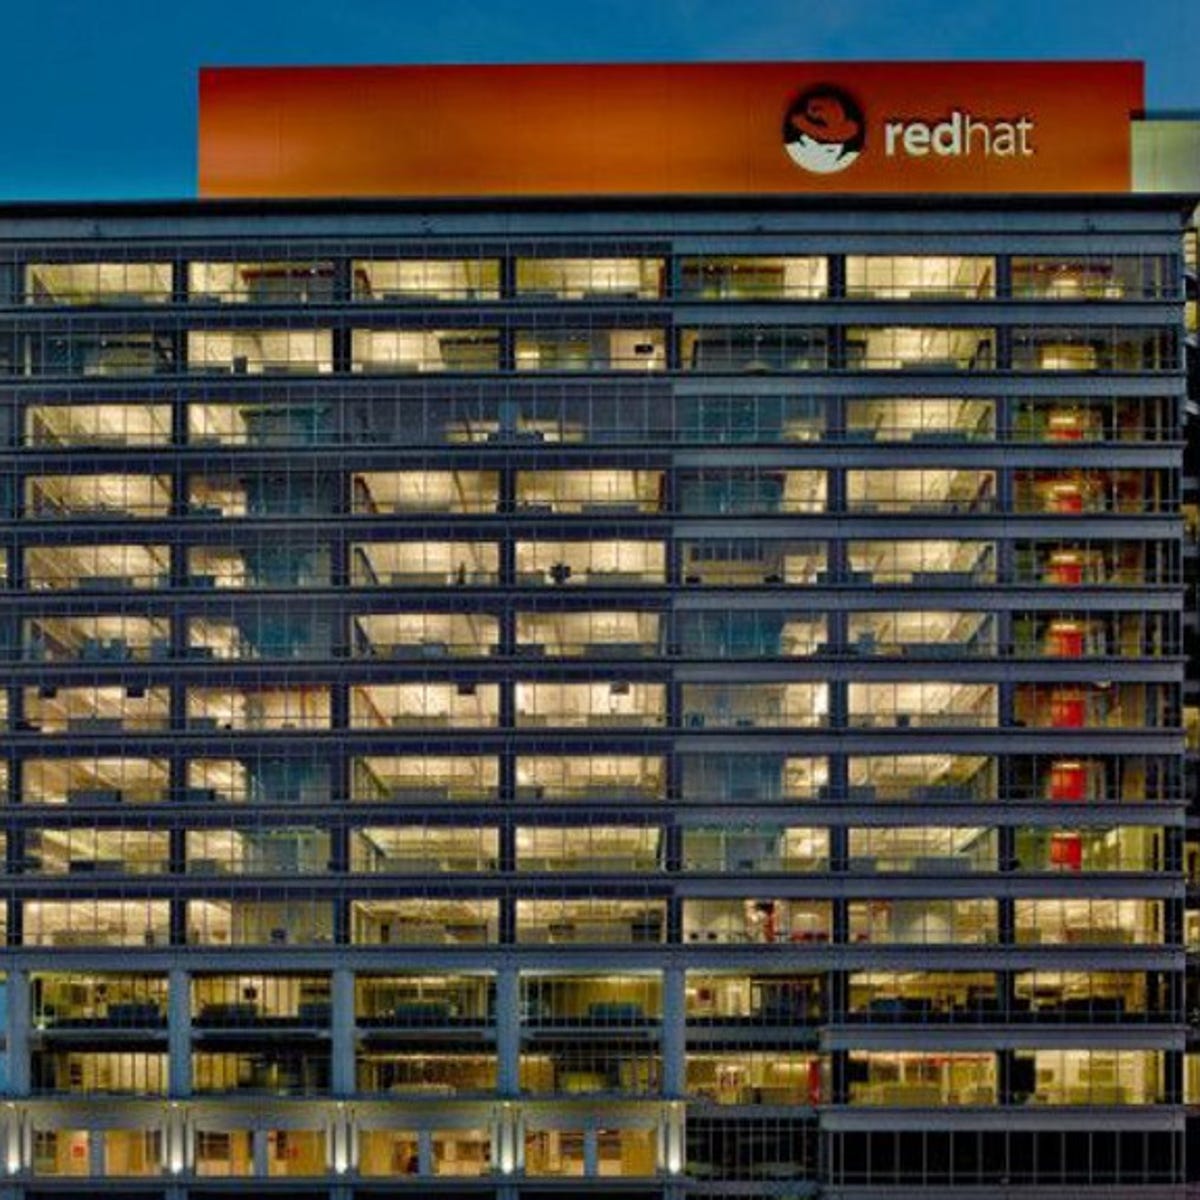 Red hat 7. Red hat офис. Red hat Headquarters. Red hat Headquarters December. Red hat 7 фото.